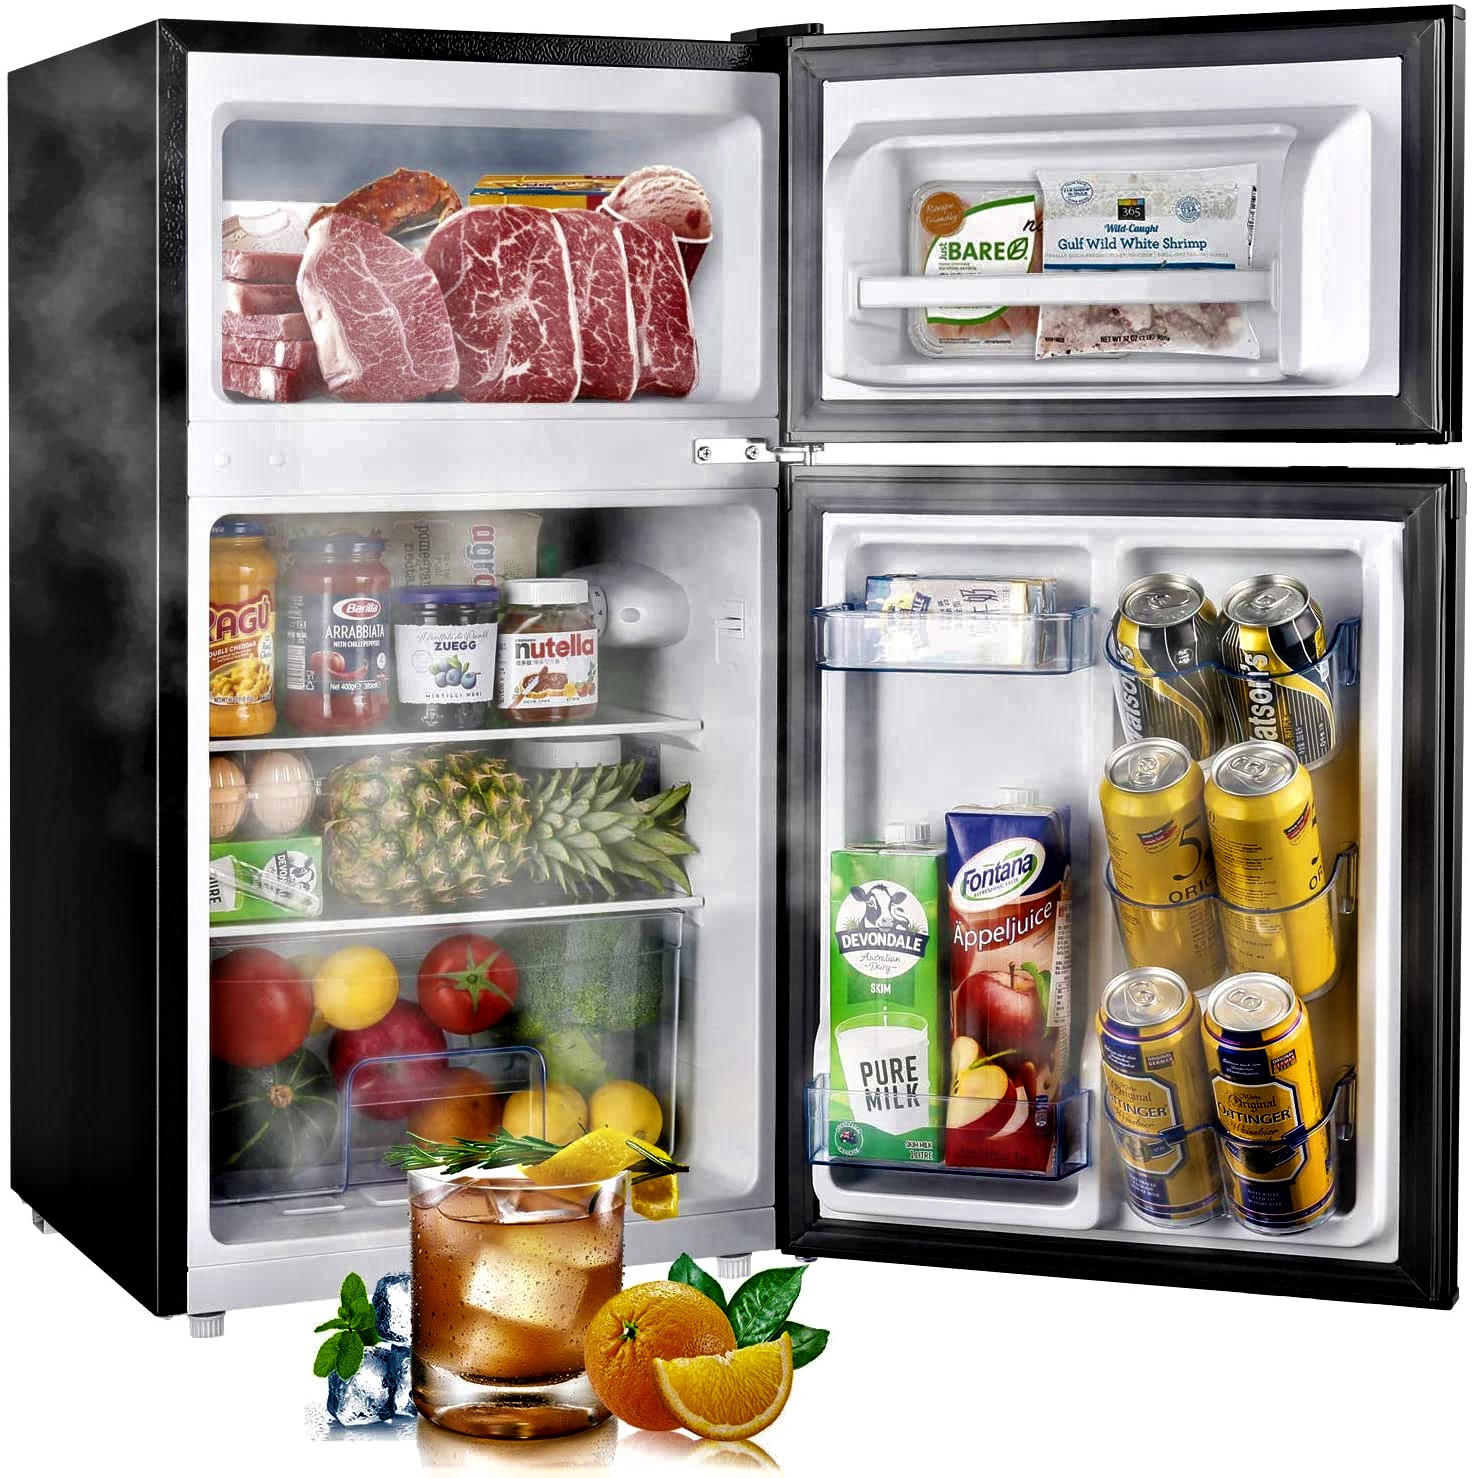 10 BEST MINI FRIDGE WITH FREEZER in 2022 REVIEW and Compared All In One Cooling Gear Lab: Any Refrigerators Air Conditioners Freezers Ice Makers Coolers Fans Reviewed And Compared.